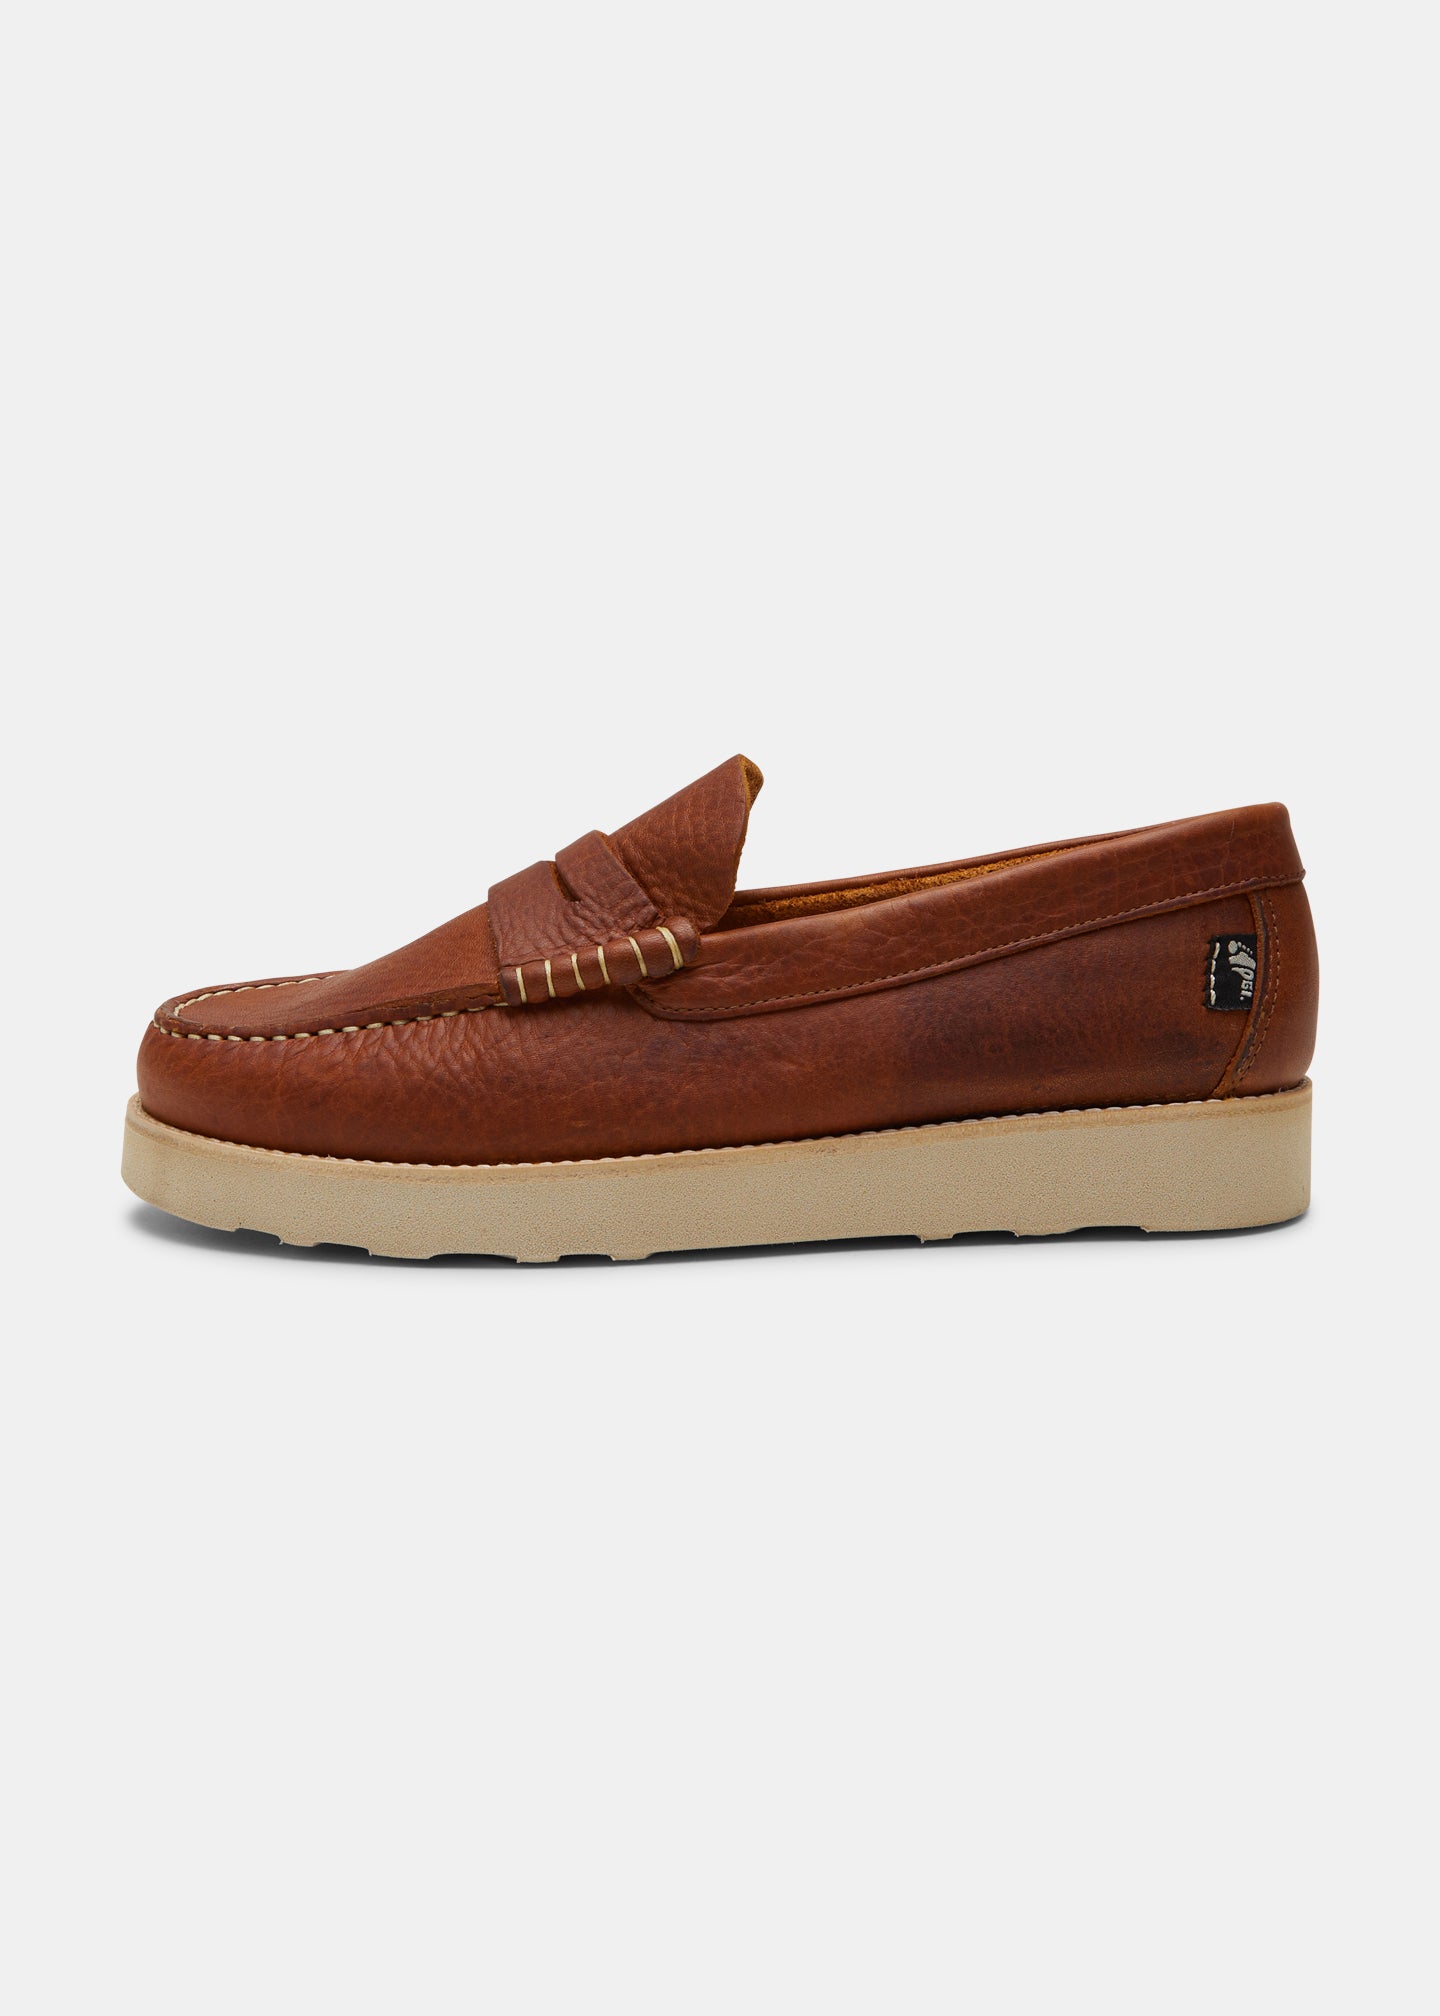 Yogi Rudy II Tumbled Leather Loafer - Chestnut Brown - Side